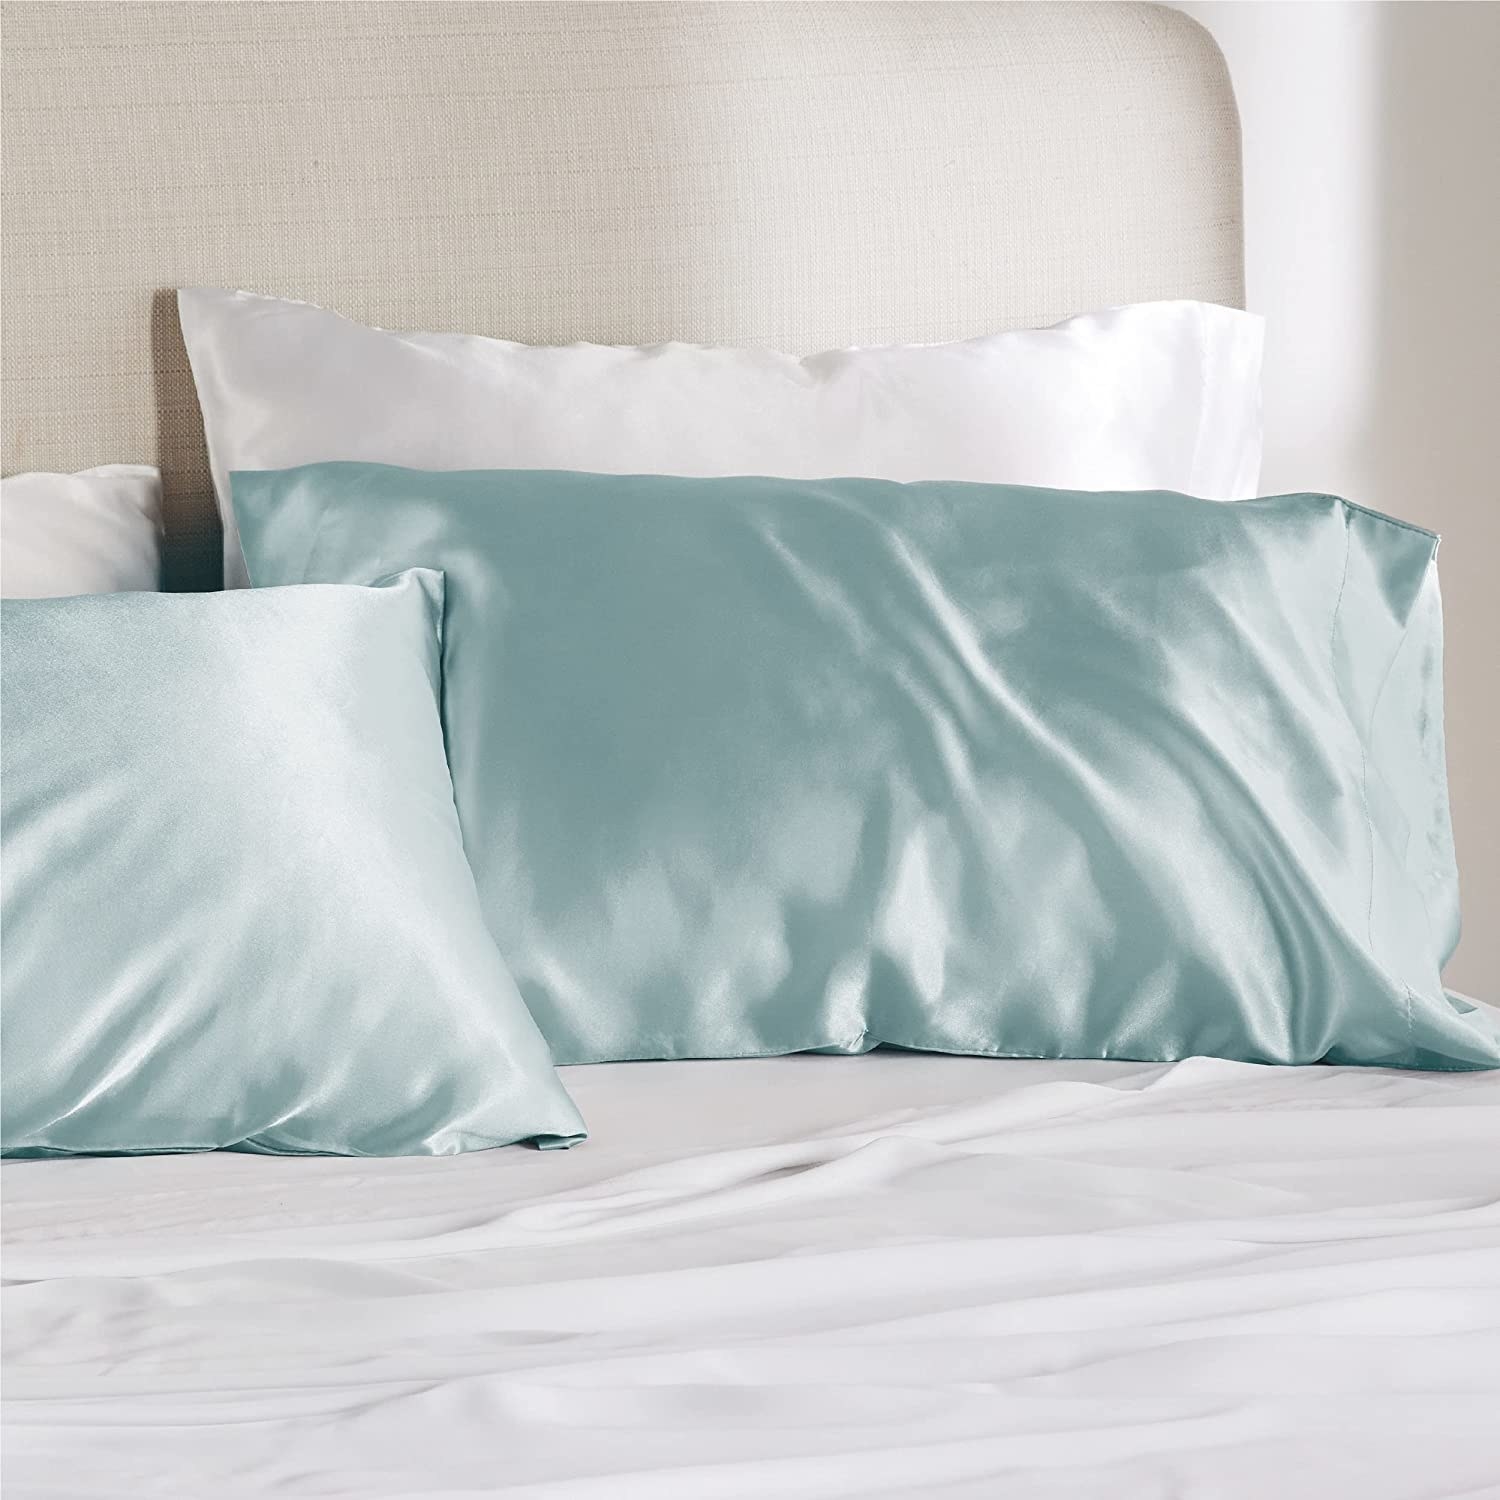 The pillowcases on a bed in light blue